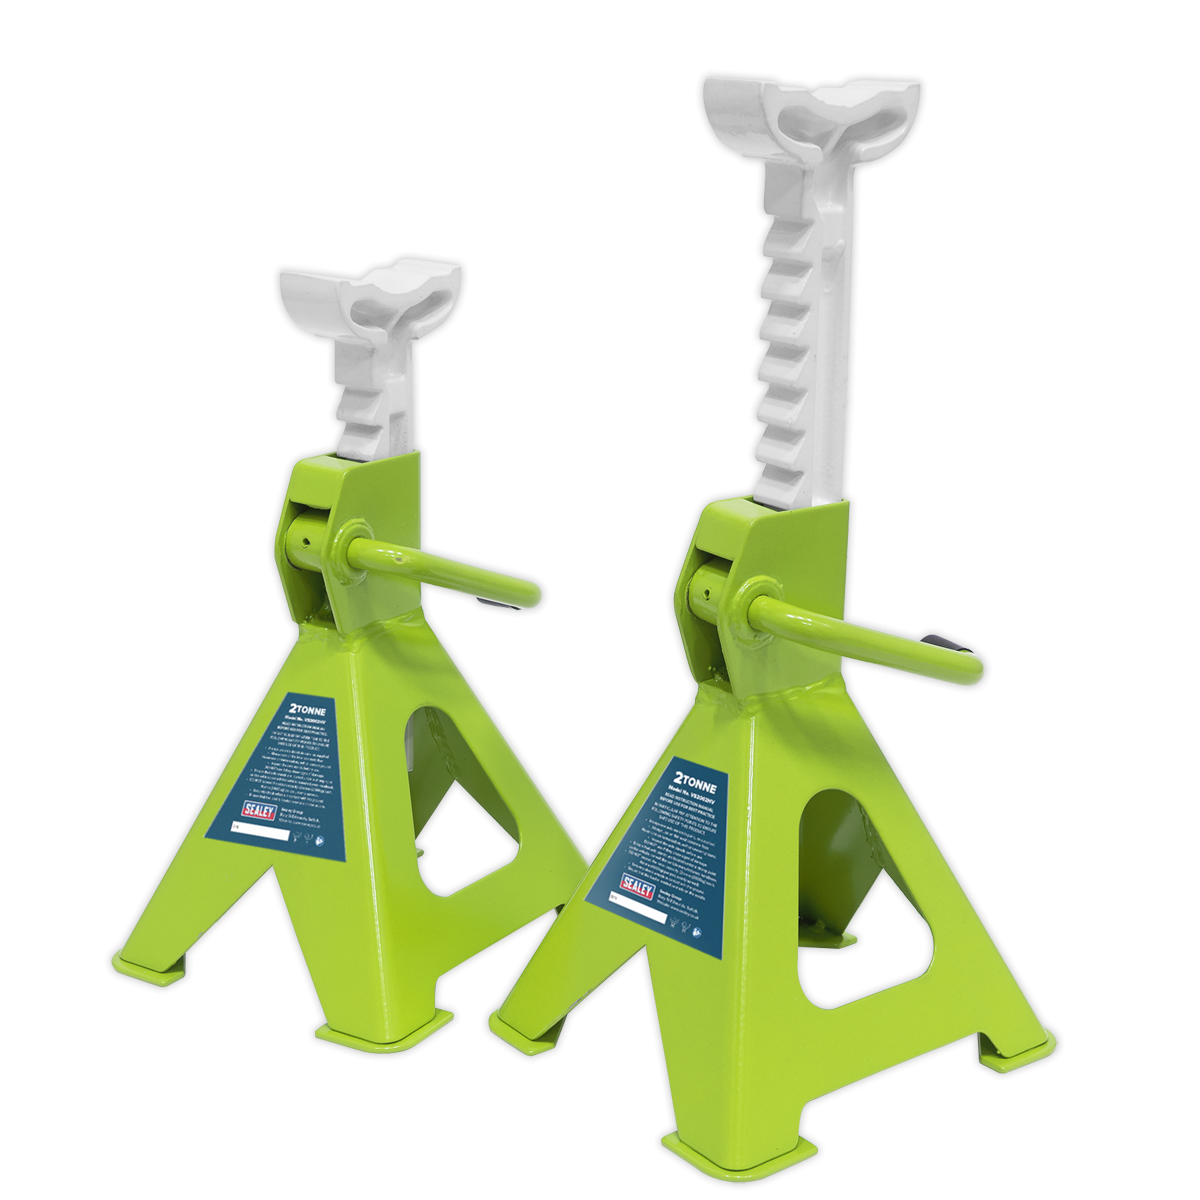 Sealey VS2002HV Axle Stands (Pair) 2tonne Capacity per Stand Ratchet Type - Hi-Vis Green